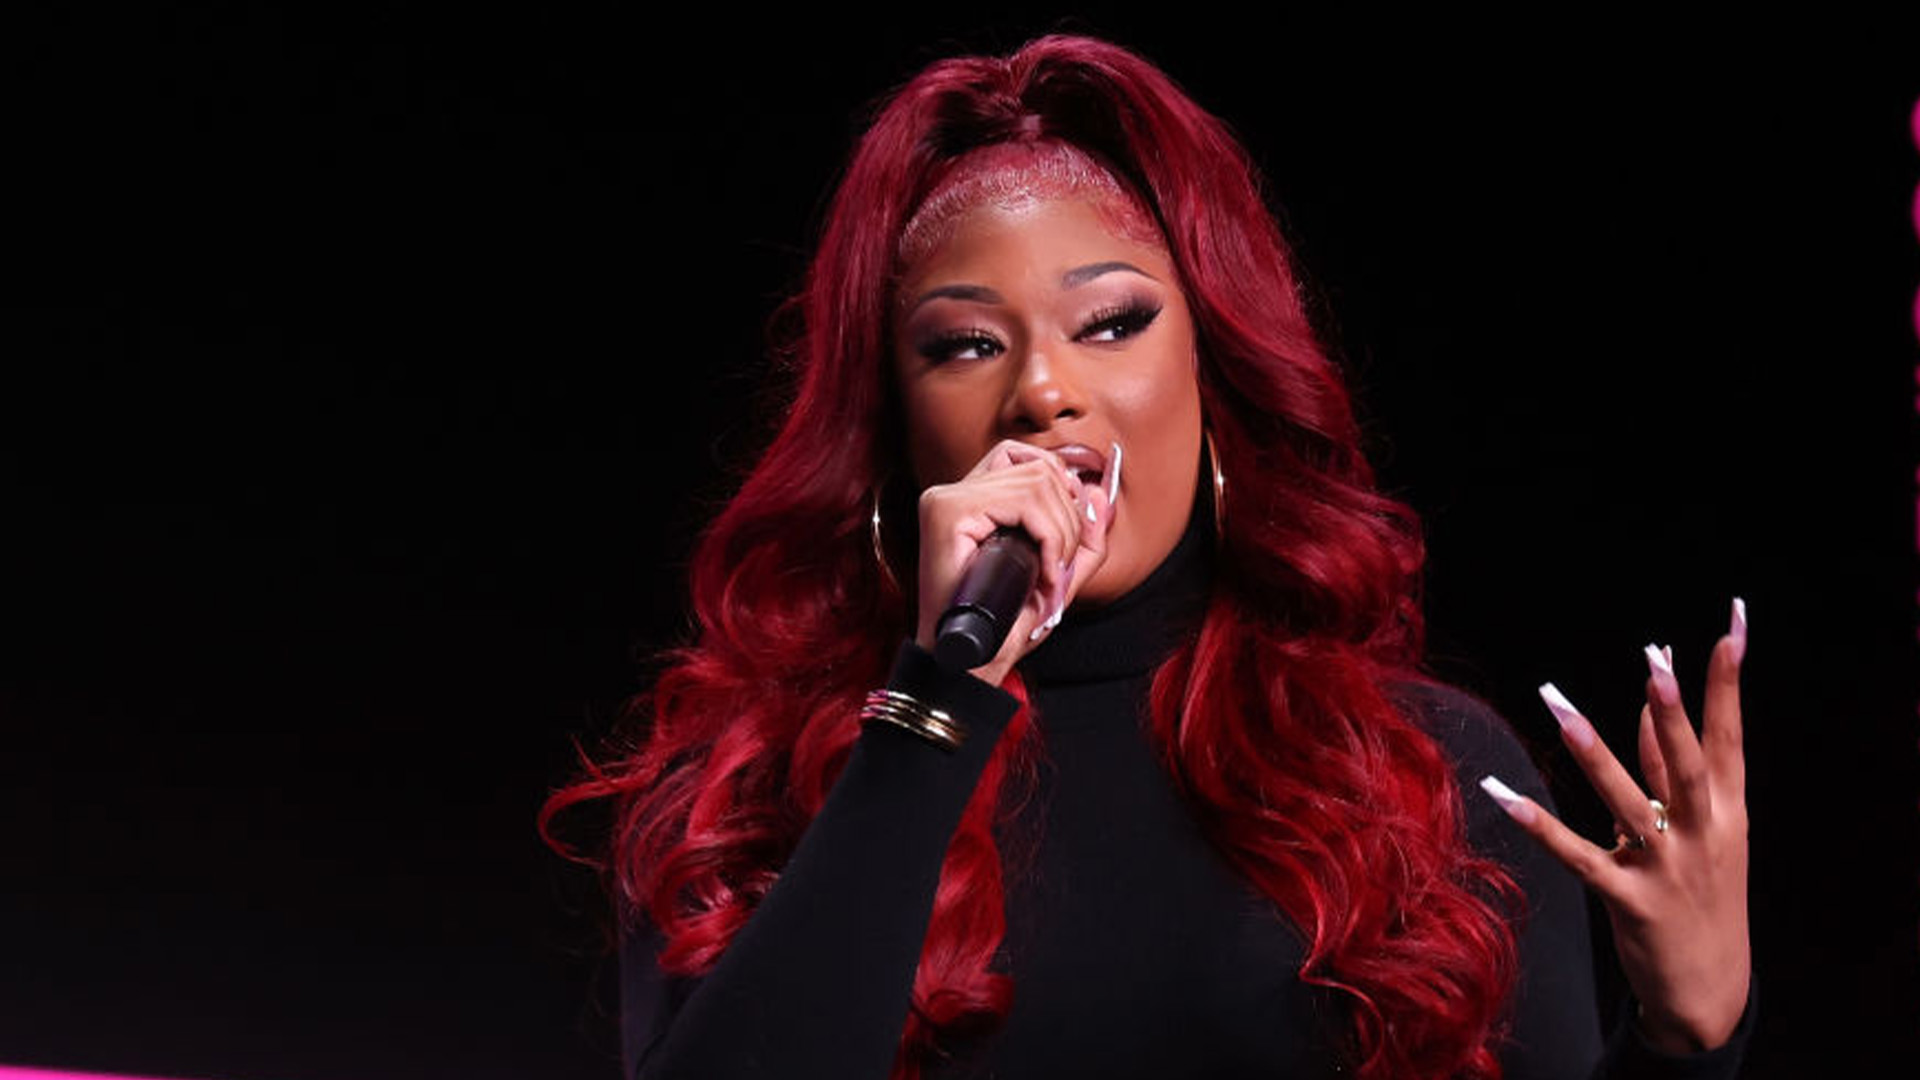 Megan Thee Stallion Inks A Distribution Deal With Warner Music Group While Reportedly Maintaining Ownership Of Her Recordings